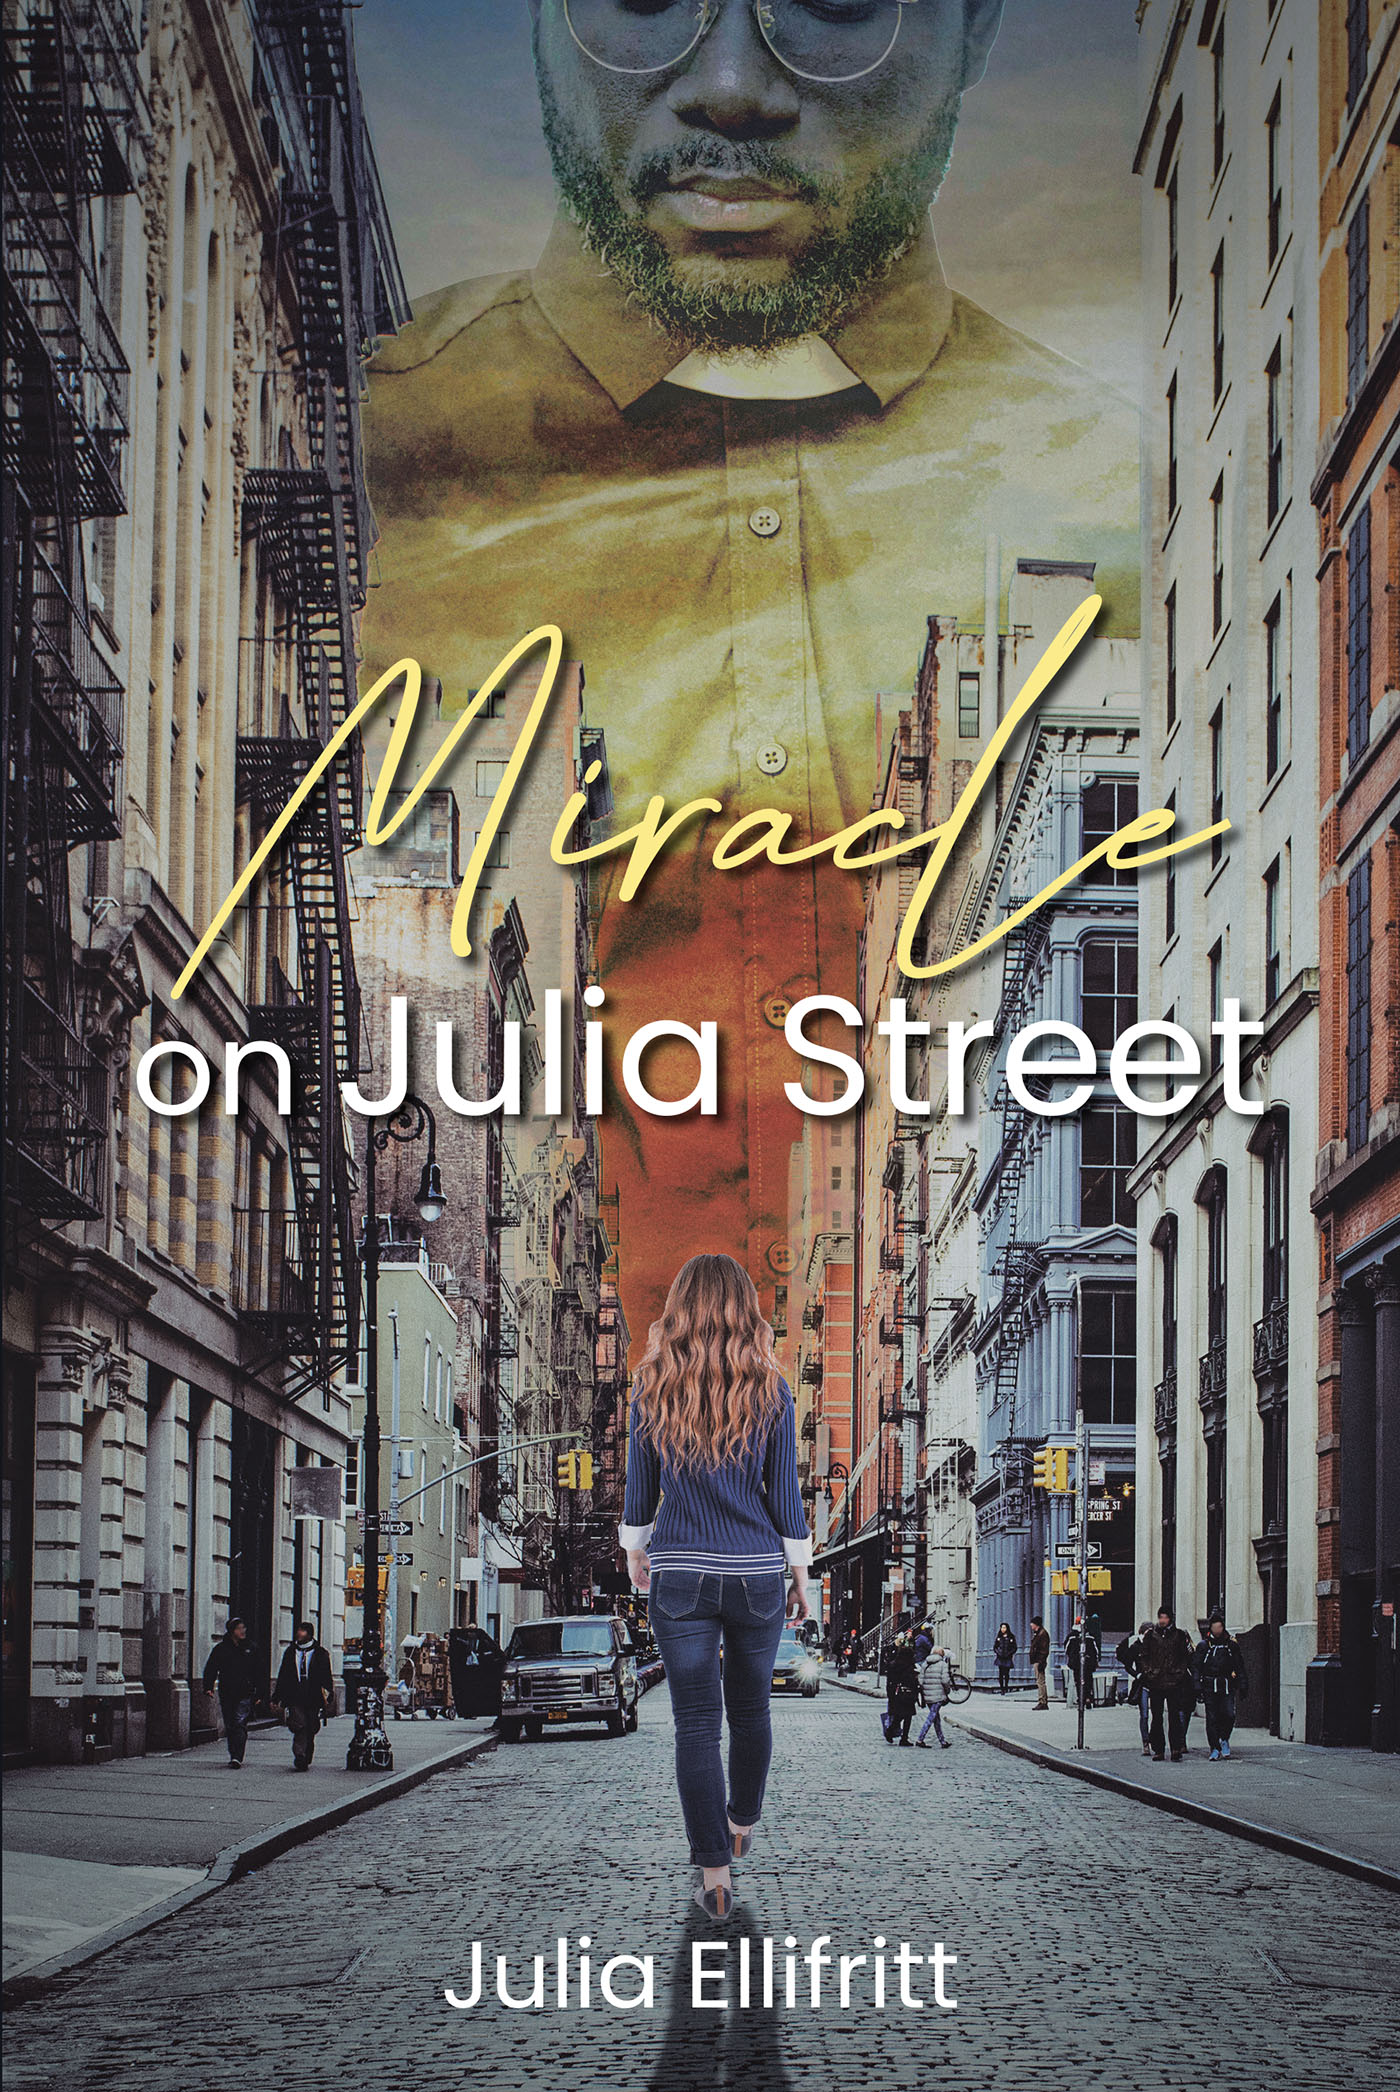 Julia Ellifritt’s Newly Released "Miracle on Julia Street" is a Heartwarming Account of Unexpected Connections